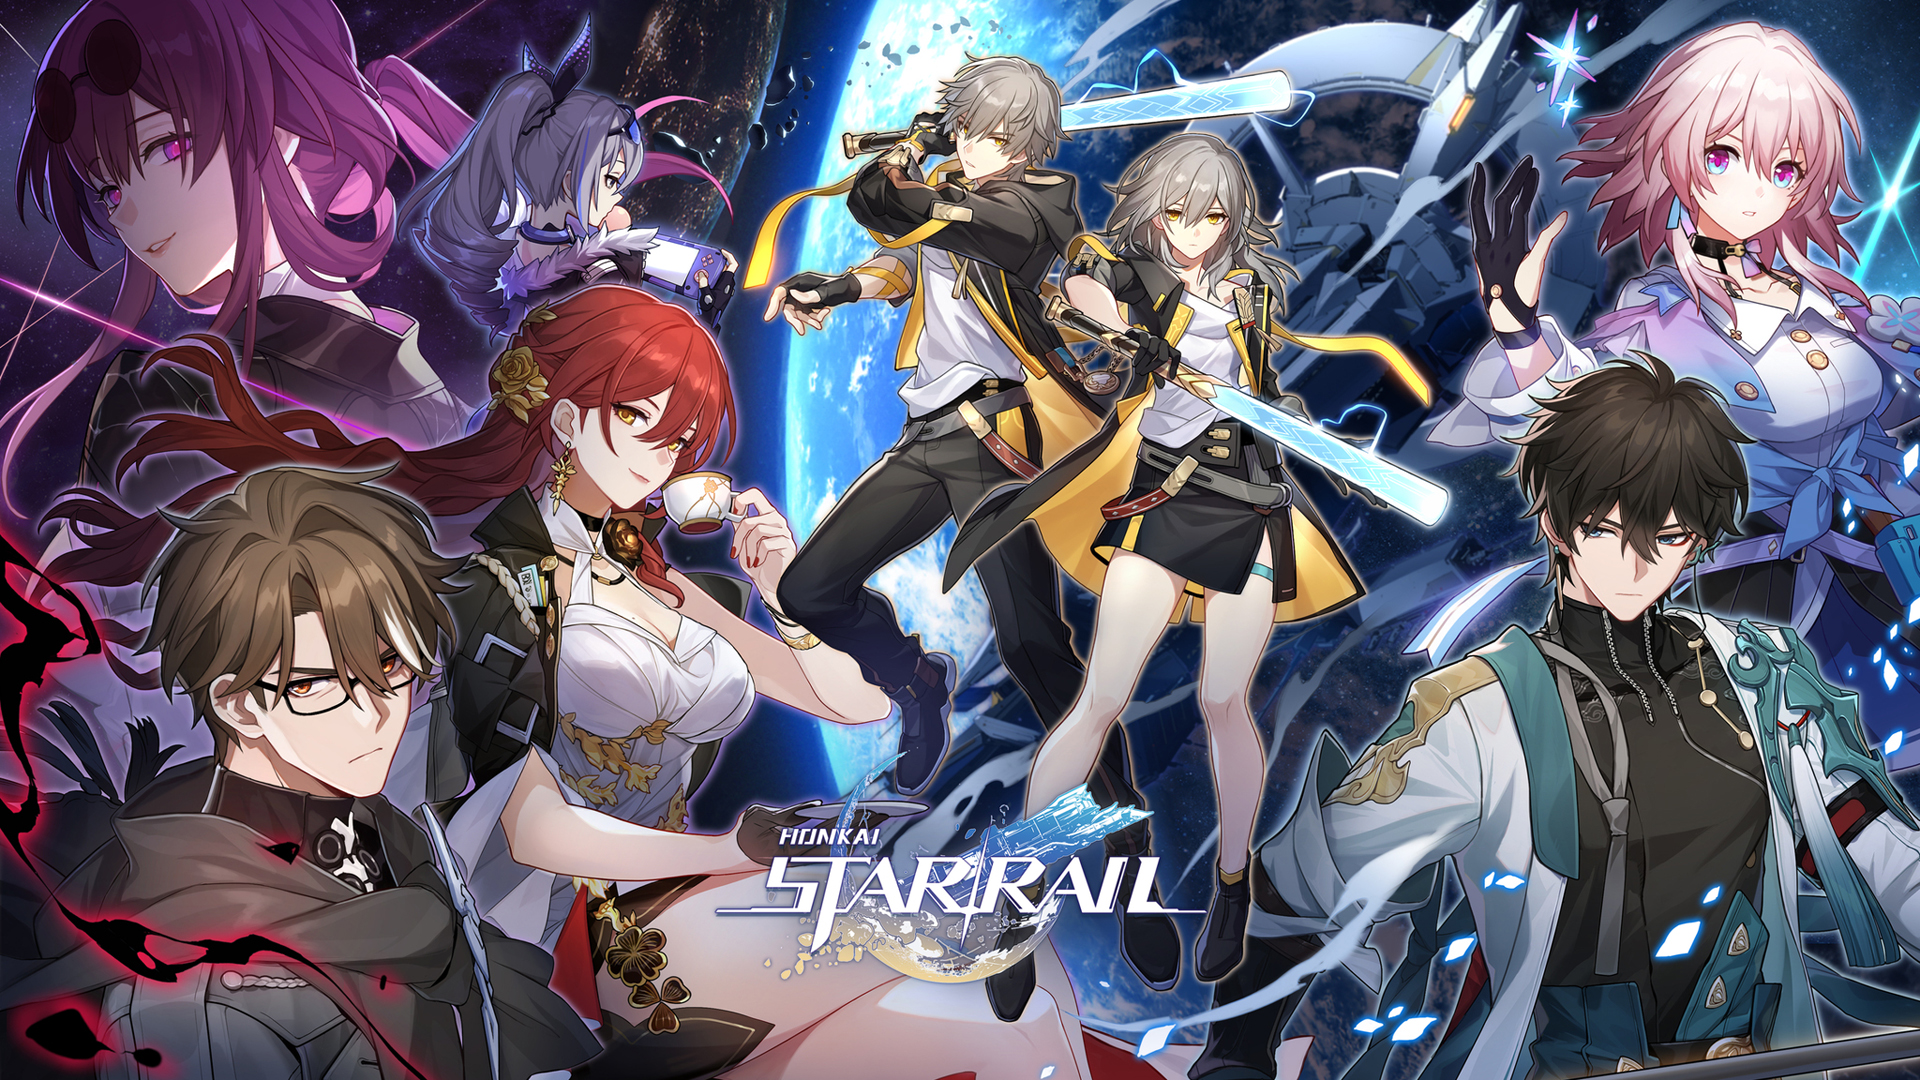 Honkai Star Rail details, story, characters and more